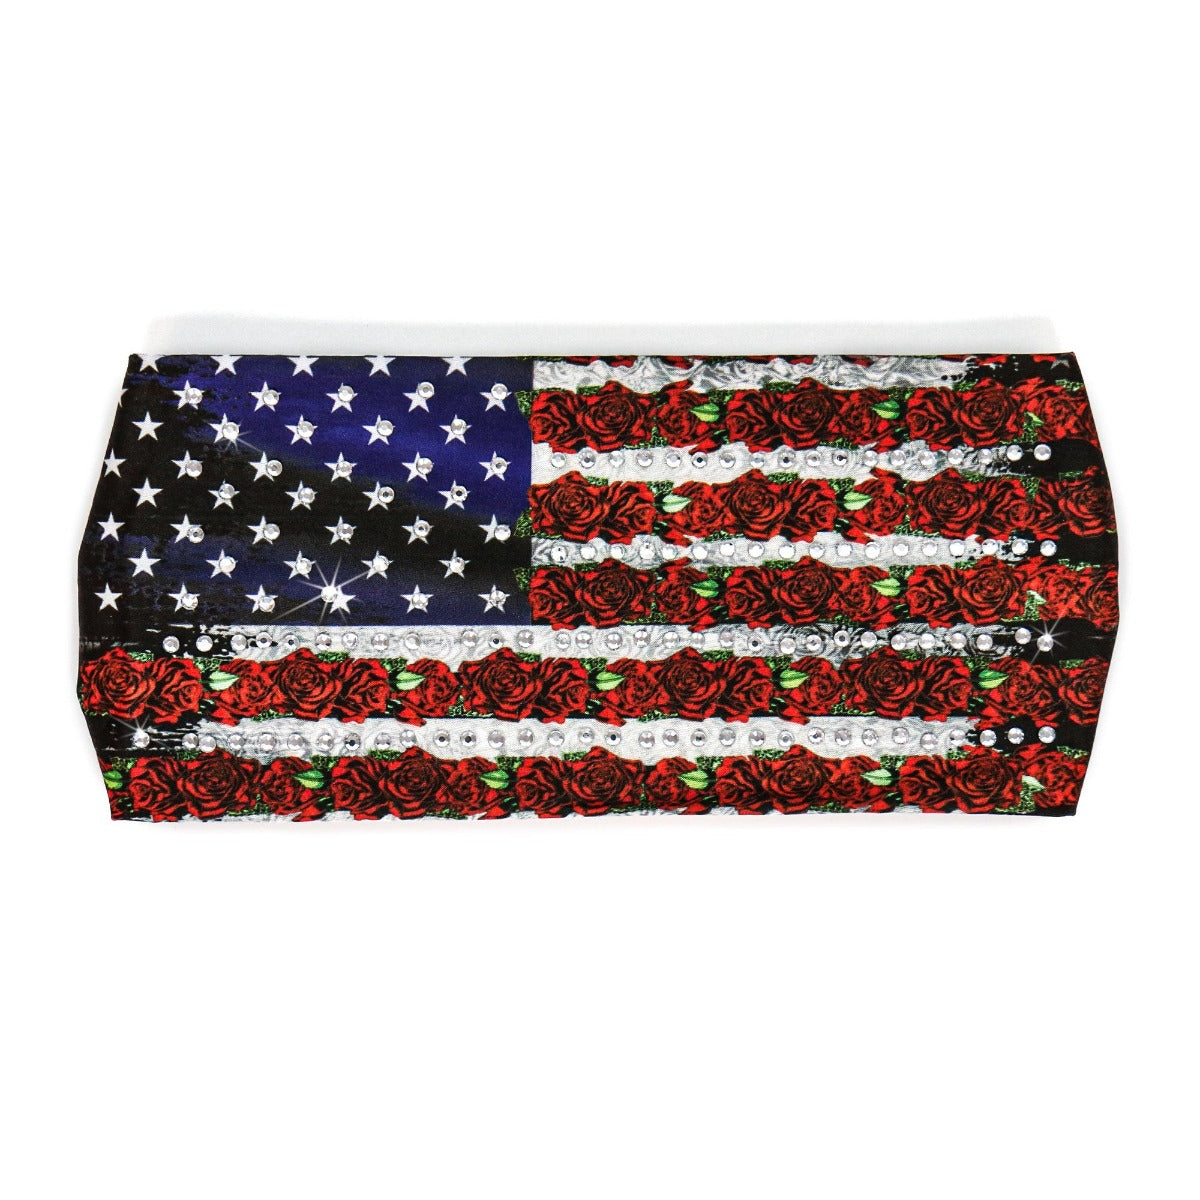 An American flag Hot Leathers Flag Rose Bandana Headband Wrap with red roses on it, featuring rhinestone crystals for a sparkling biker style.